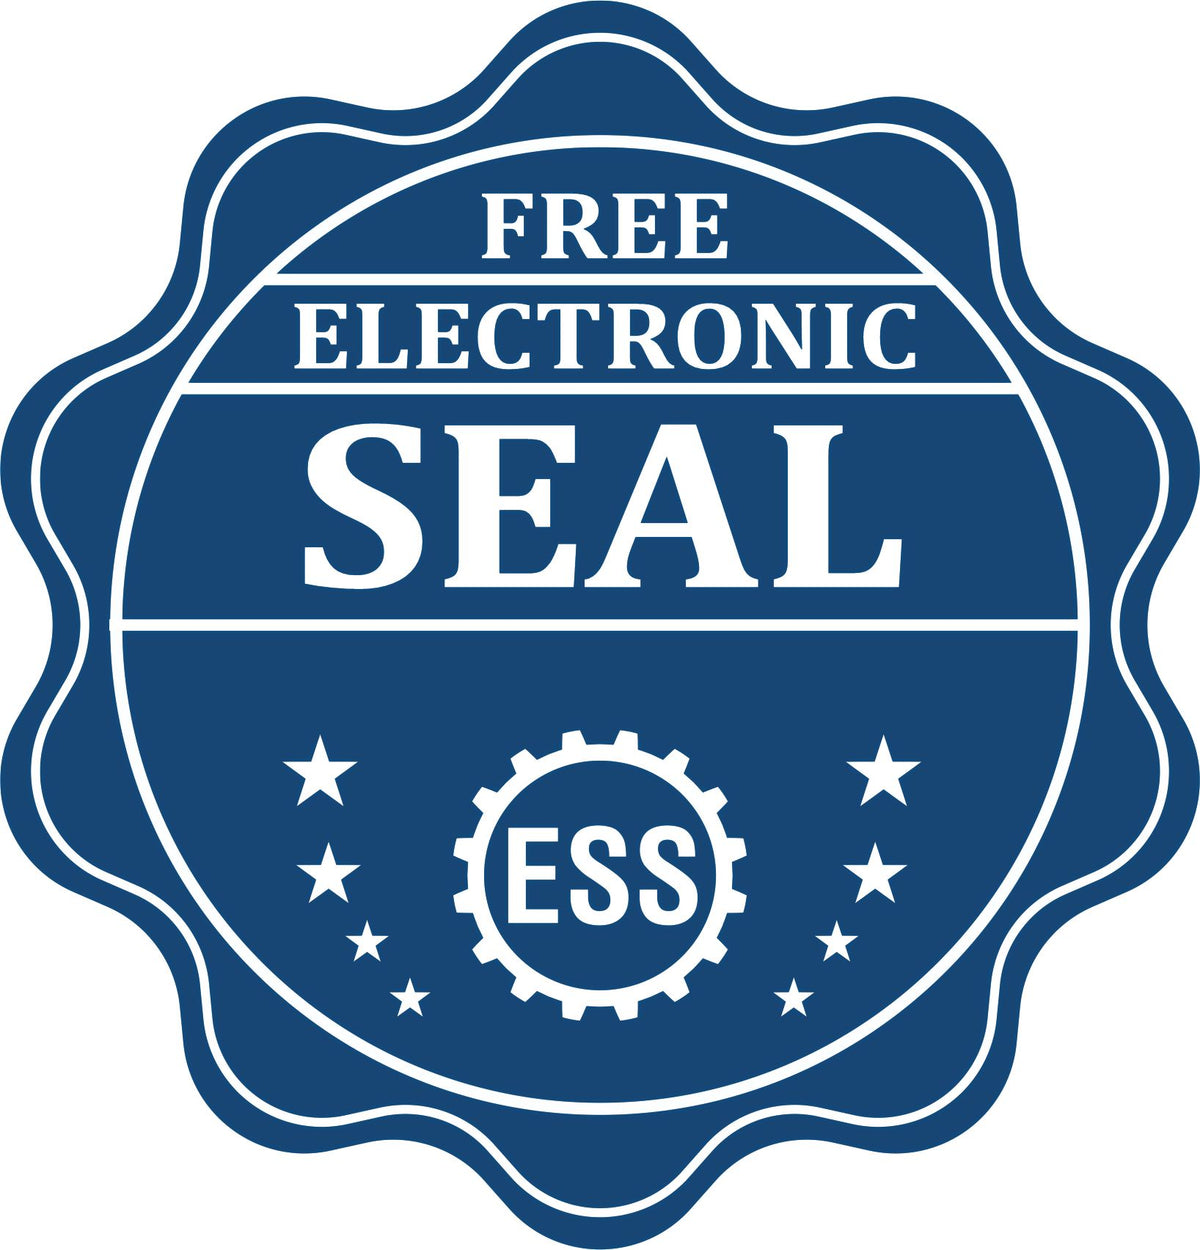 A badge showing a free electronic seal for the Extended Long Reach Guam Architect Seal Embosser with stars and the ESS gear on the emblem.